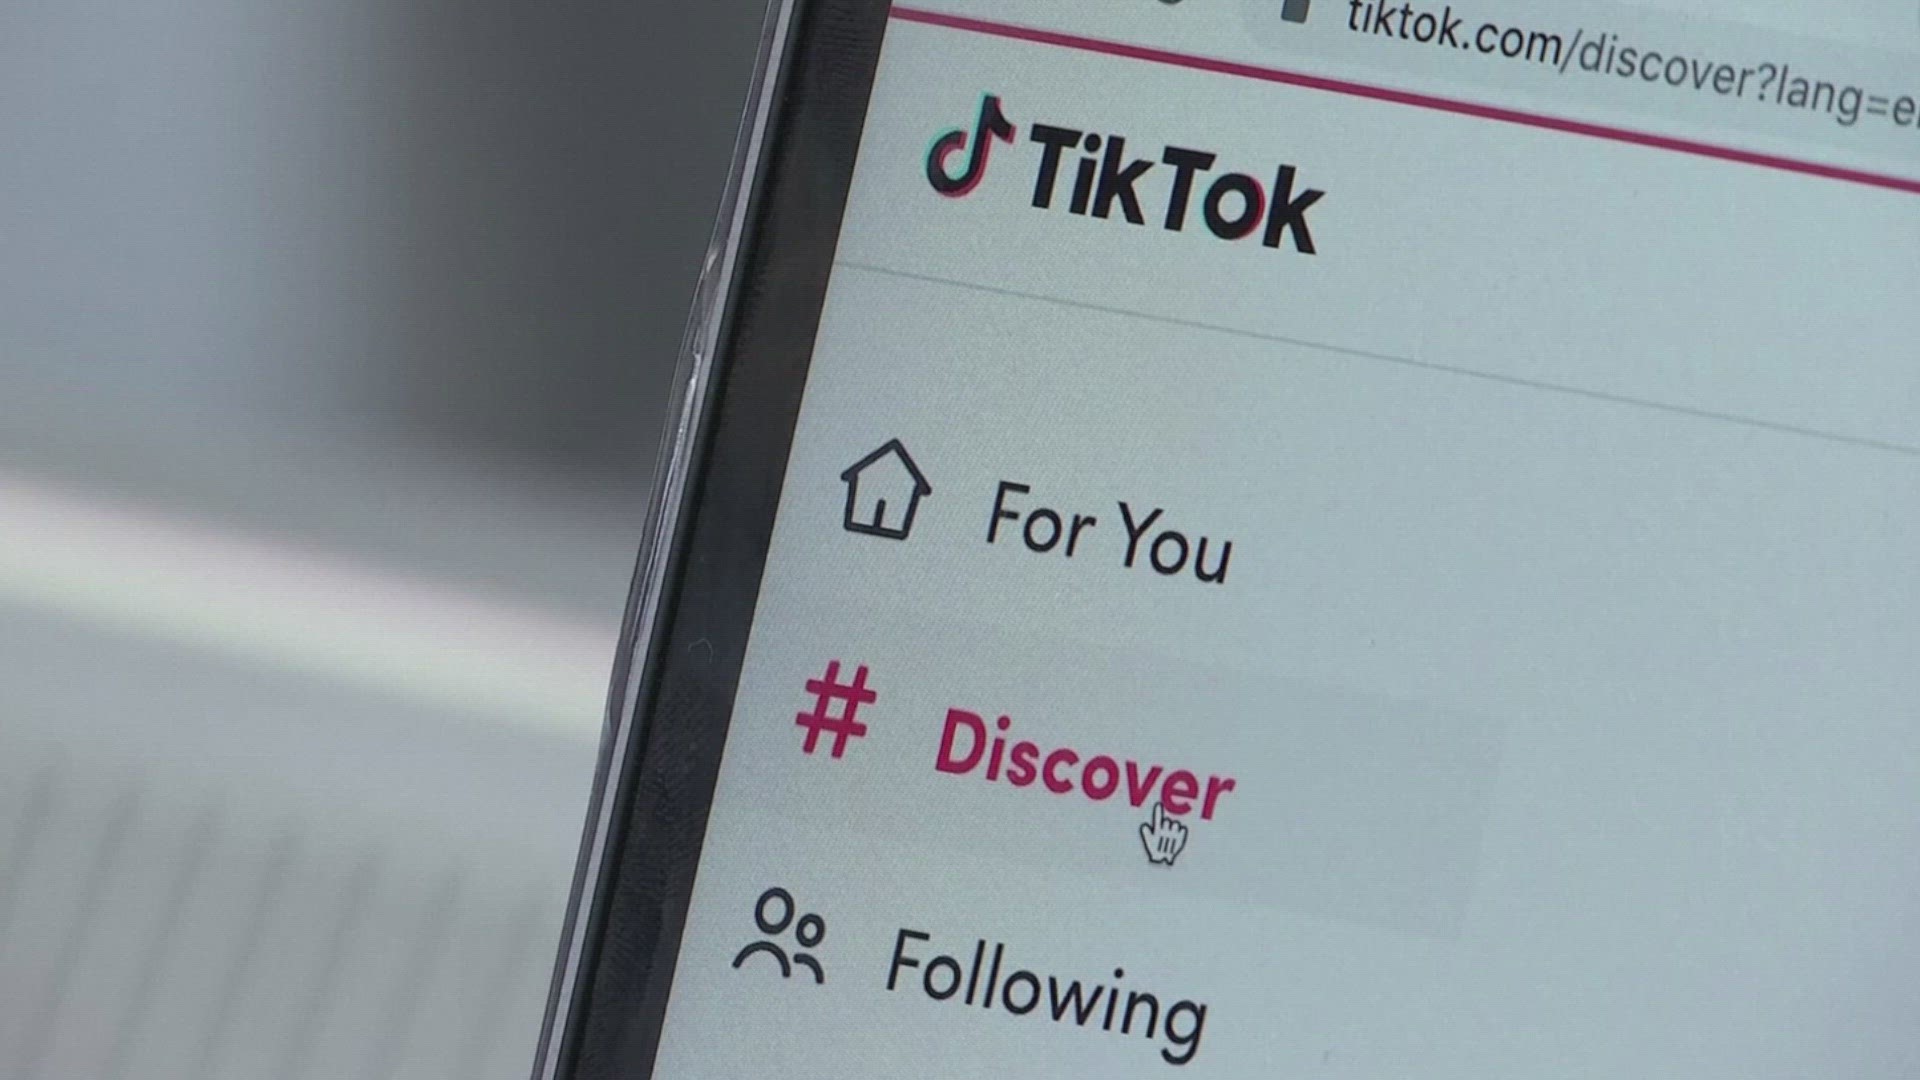 One of the biggest and most popular apps used by people all over the world is TikTok. It's owned by the Chinese company ByteDance and now, due to security concerns, officials from both the Democratic and Republican parties here in the U.S. are warning their respective staffs against using the app. Veuer's Nick Cardona has that story.